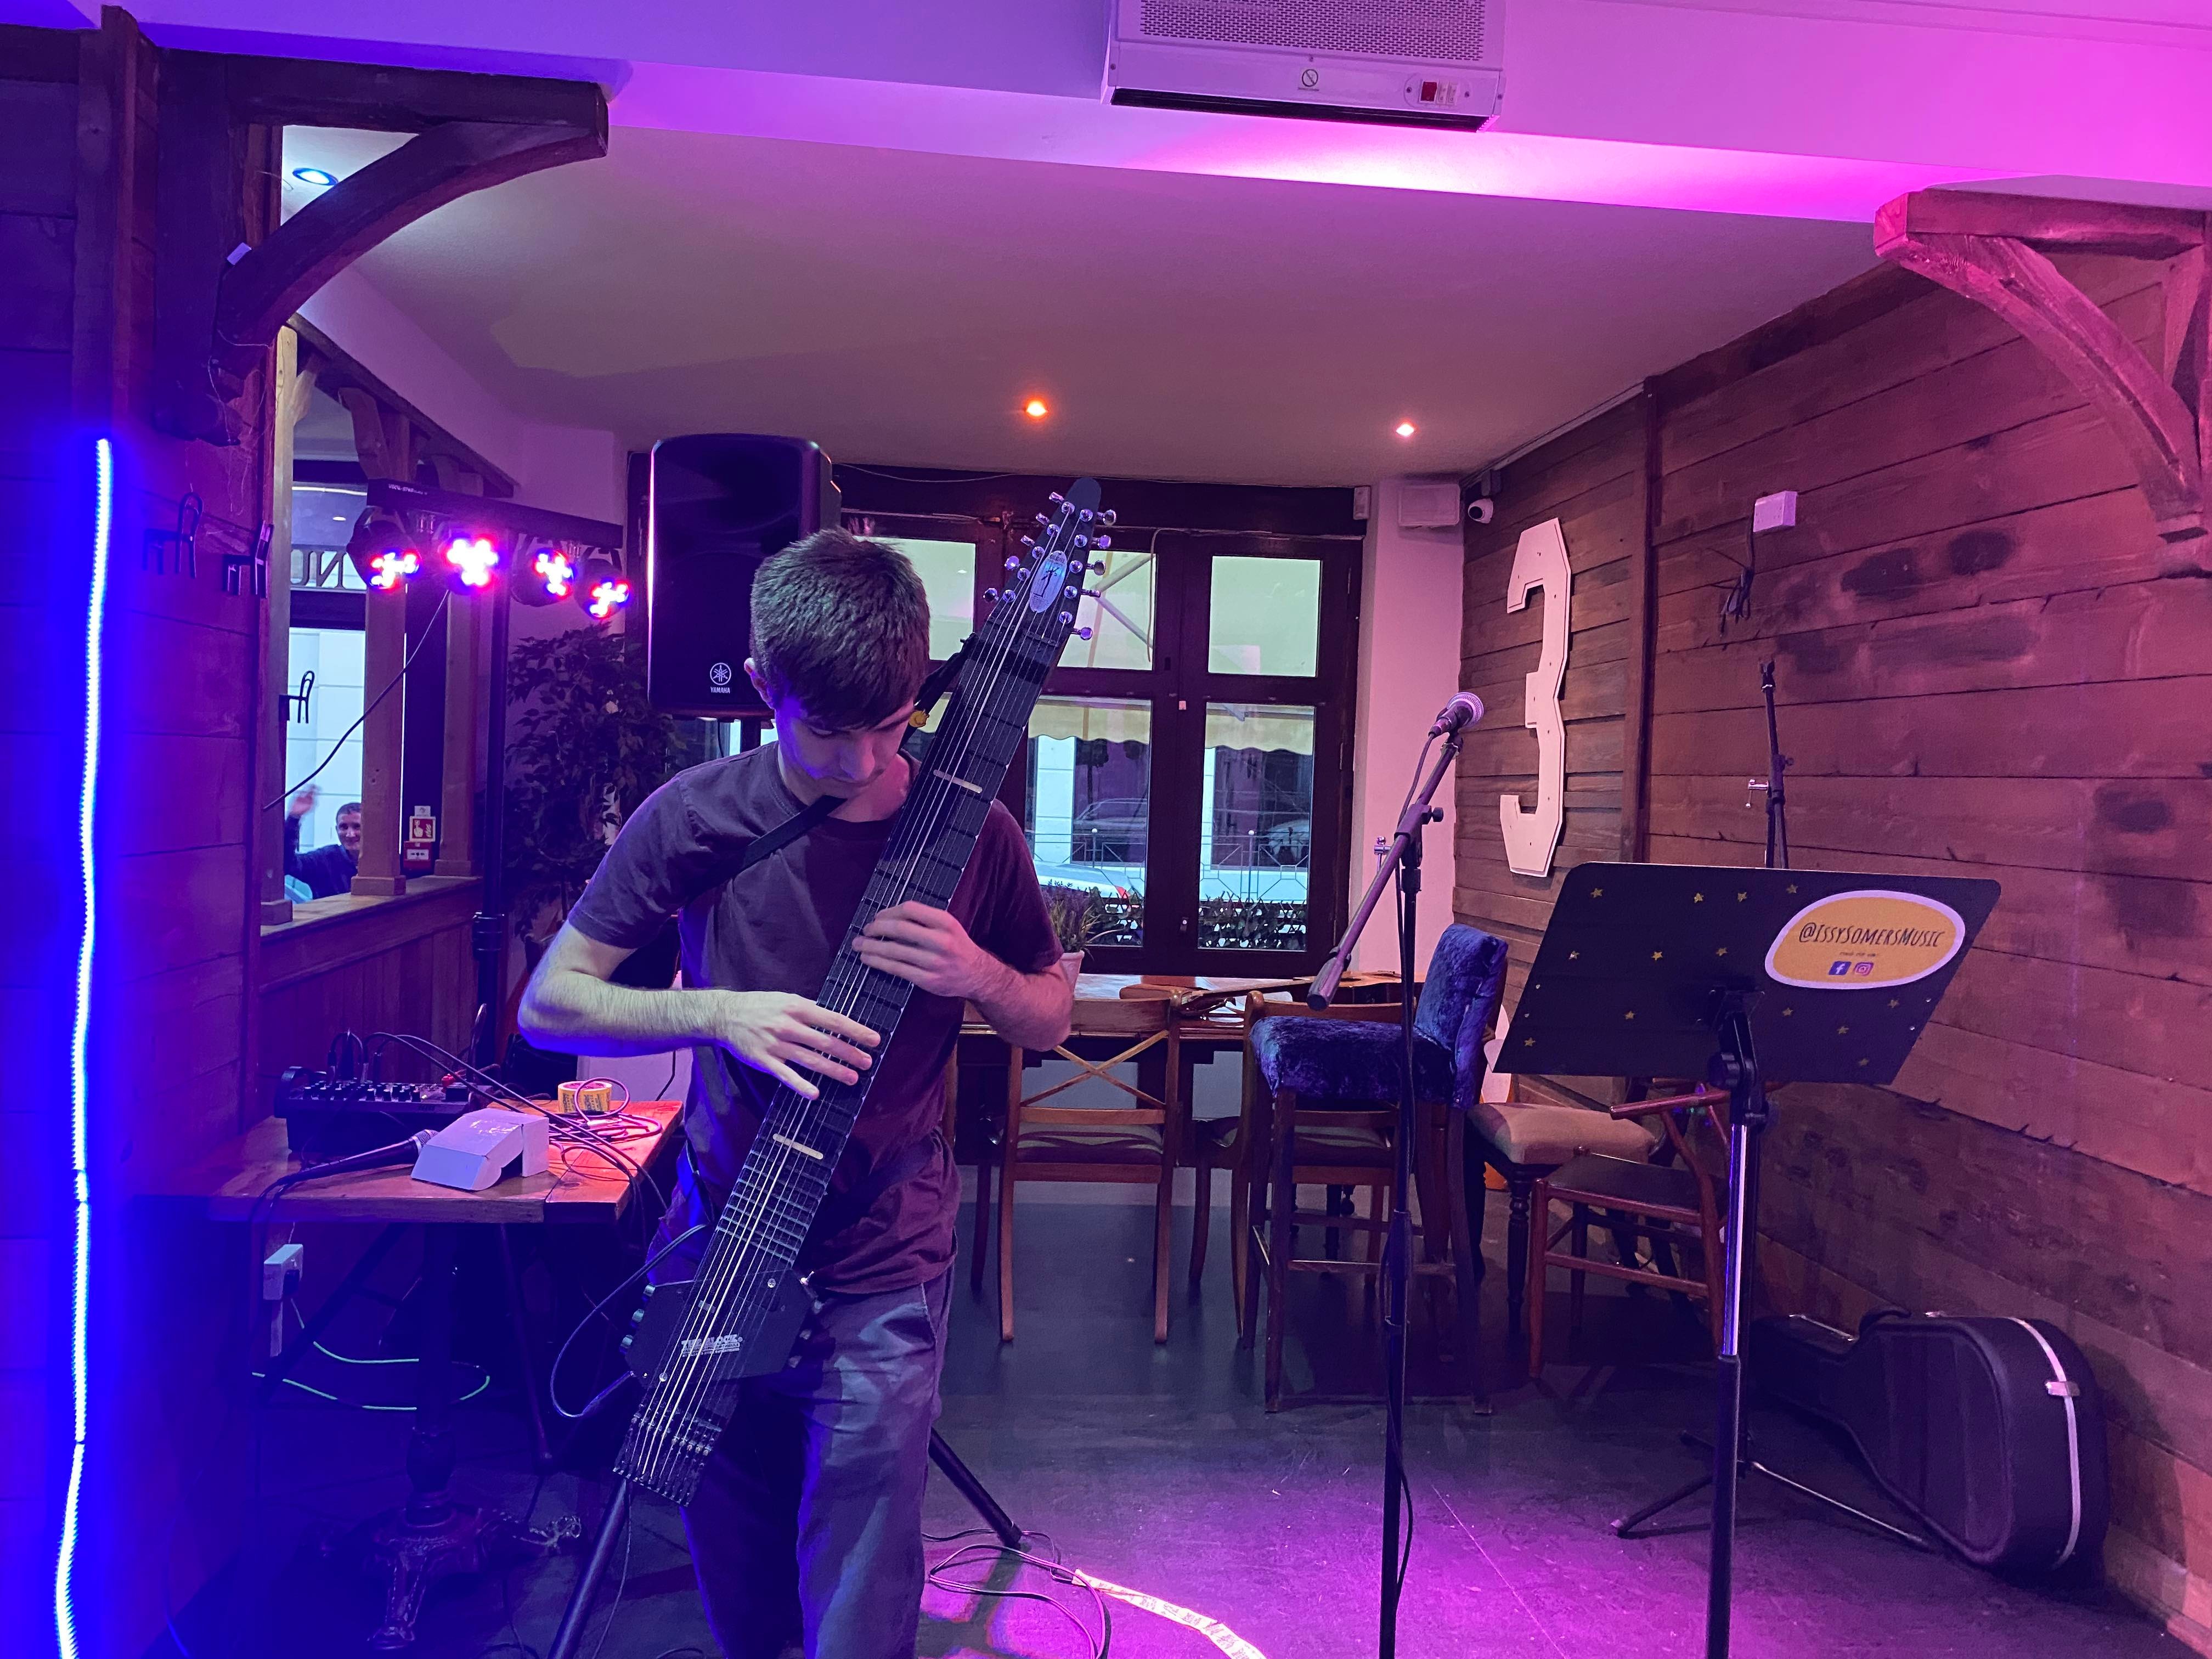 Alex performing on the Chapman Stick